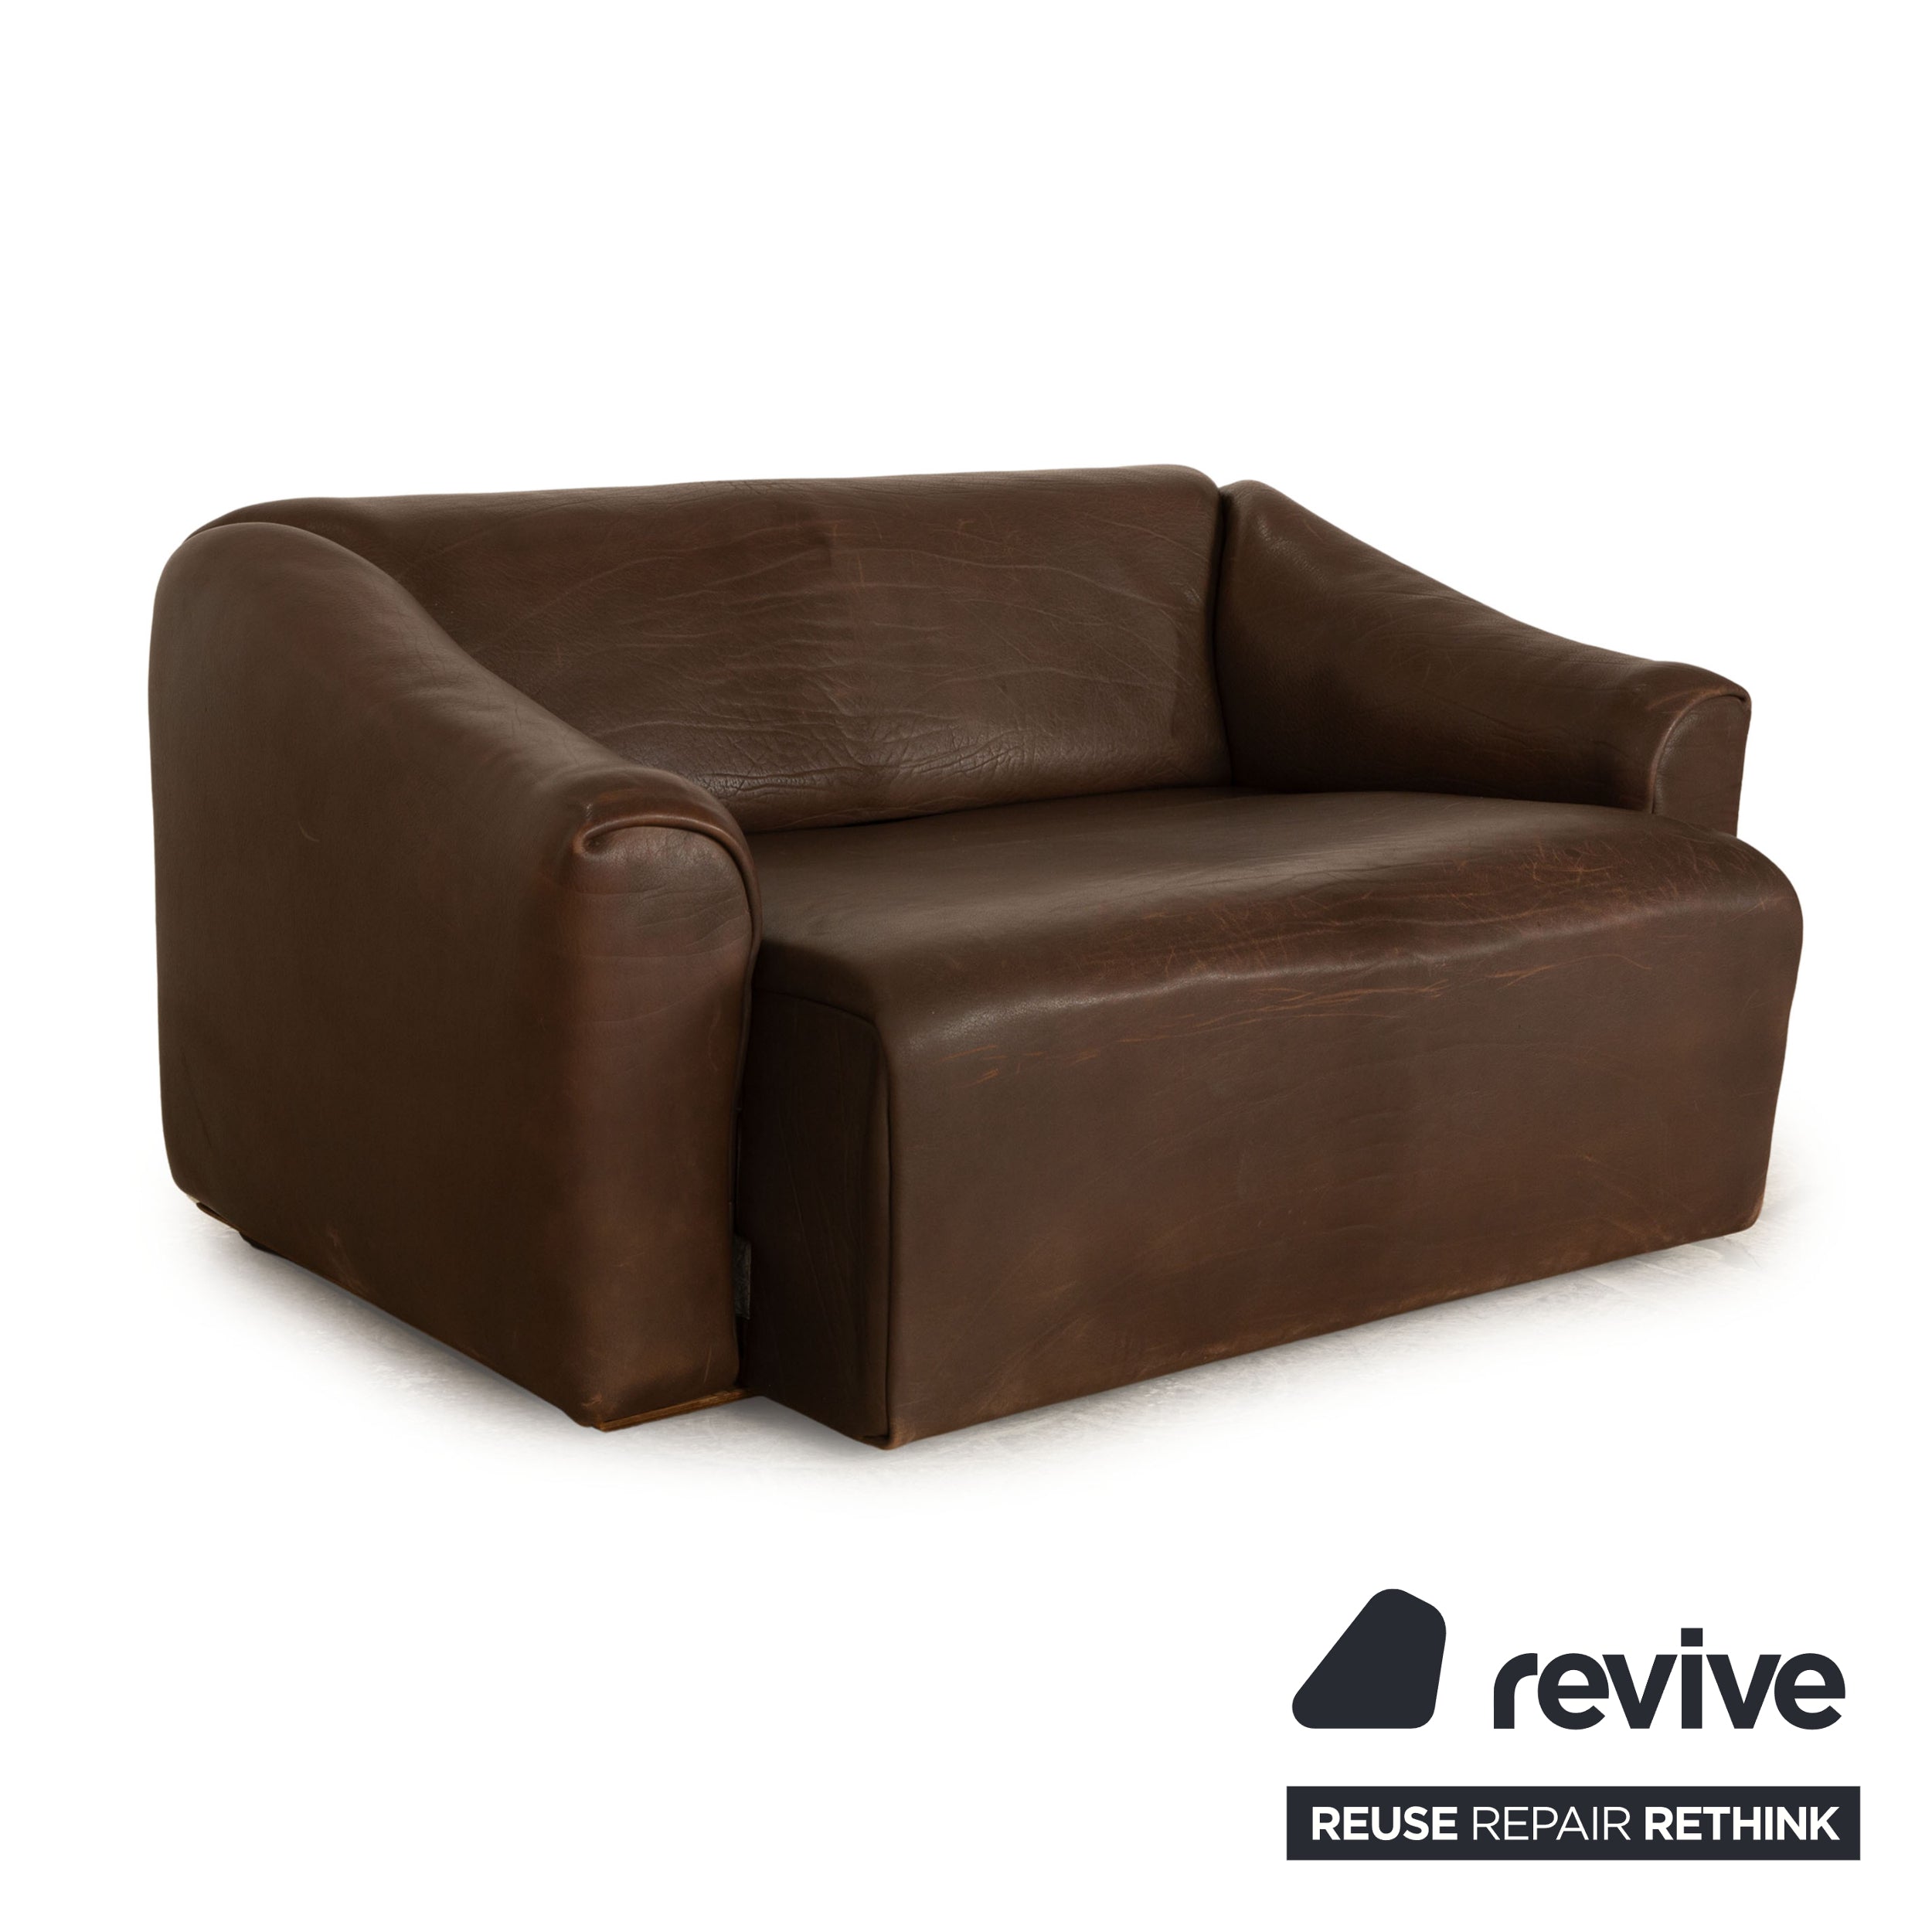 de Sede DS 47 leather two-seater brown sofa couch manual function